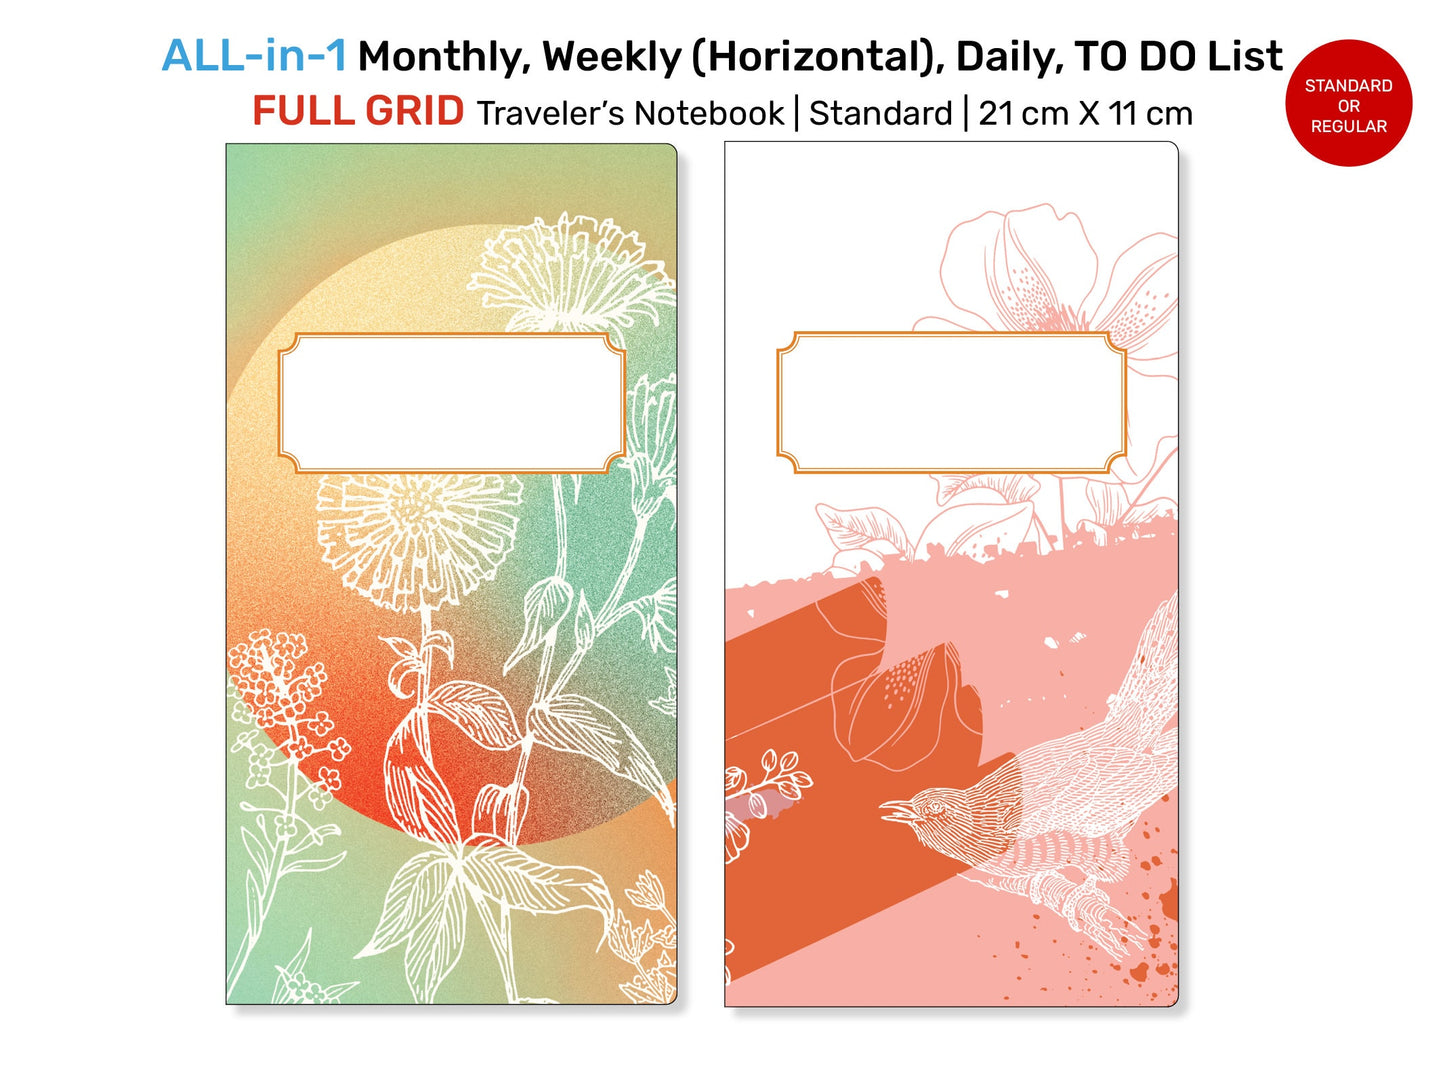 Standard TN ALL-in-1 Monthly, Weekly Horizontal, Daily, List Full GRID Printable Traveler's Notebook Insert